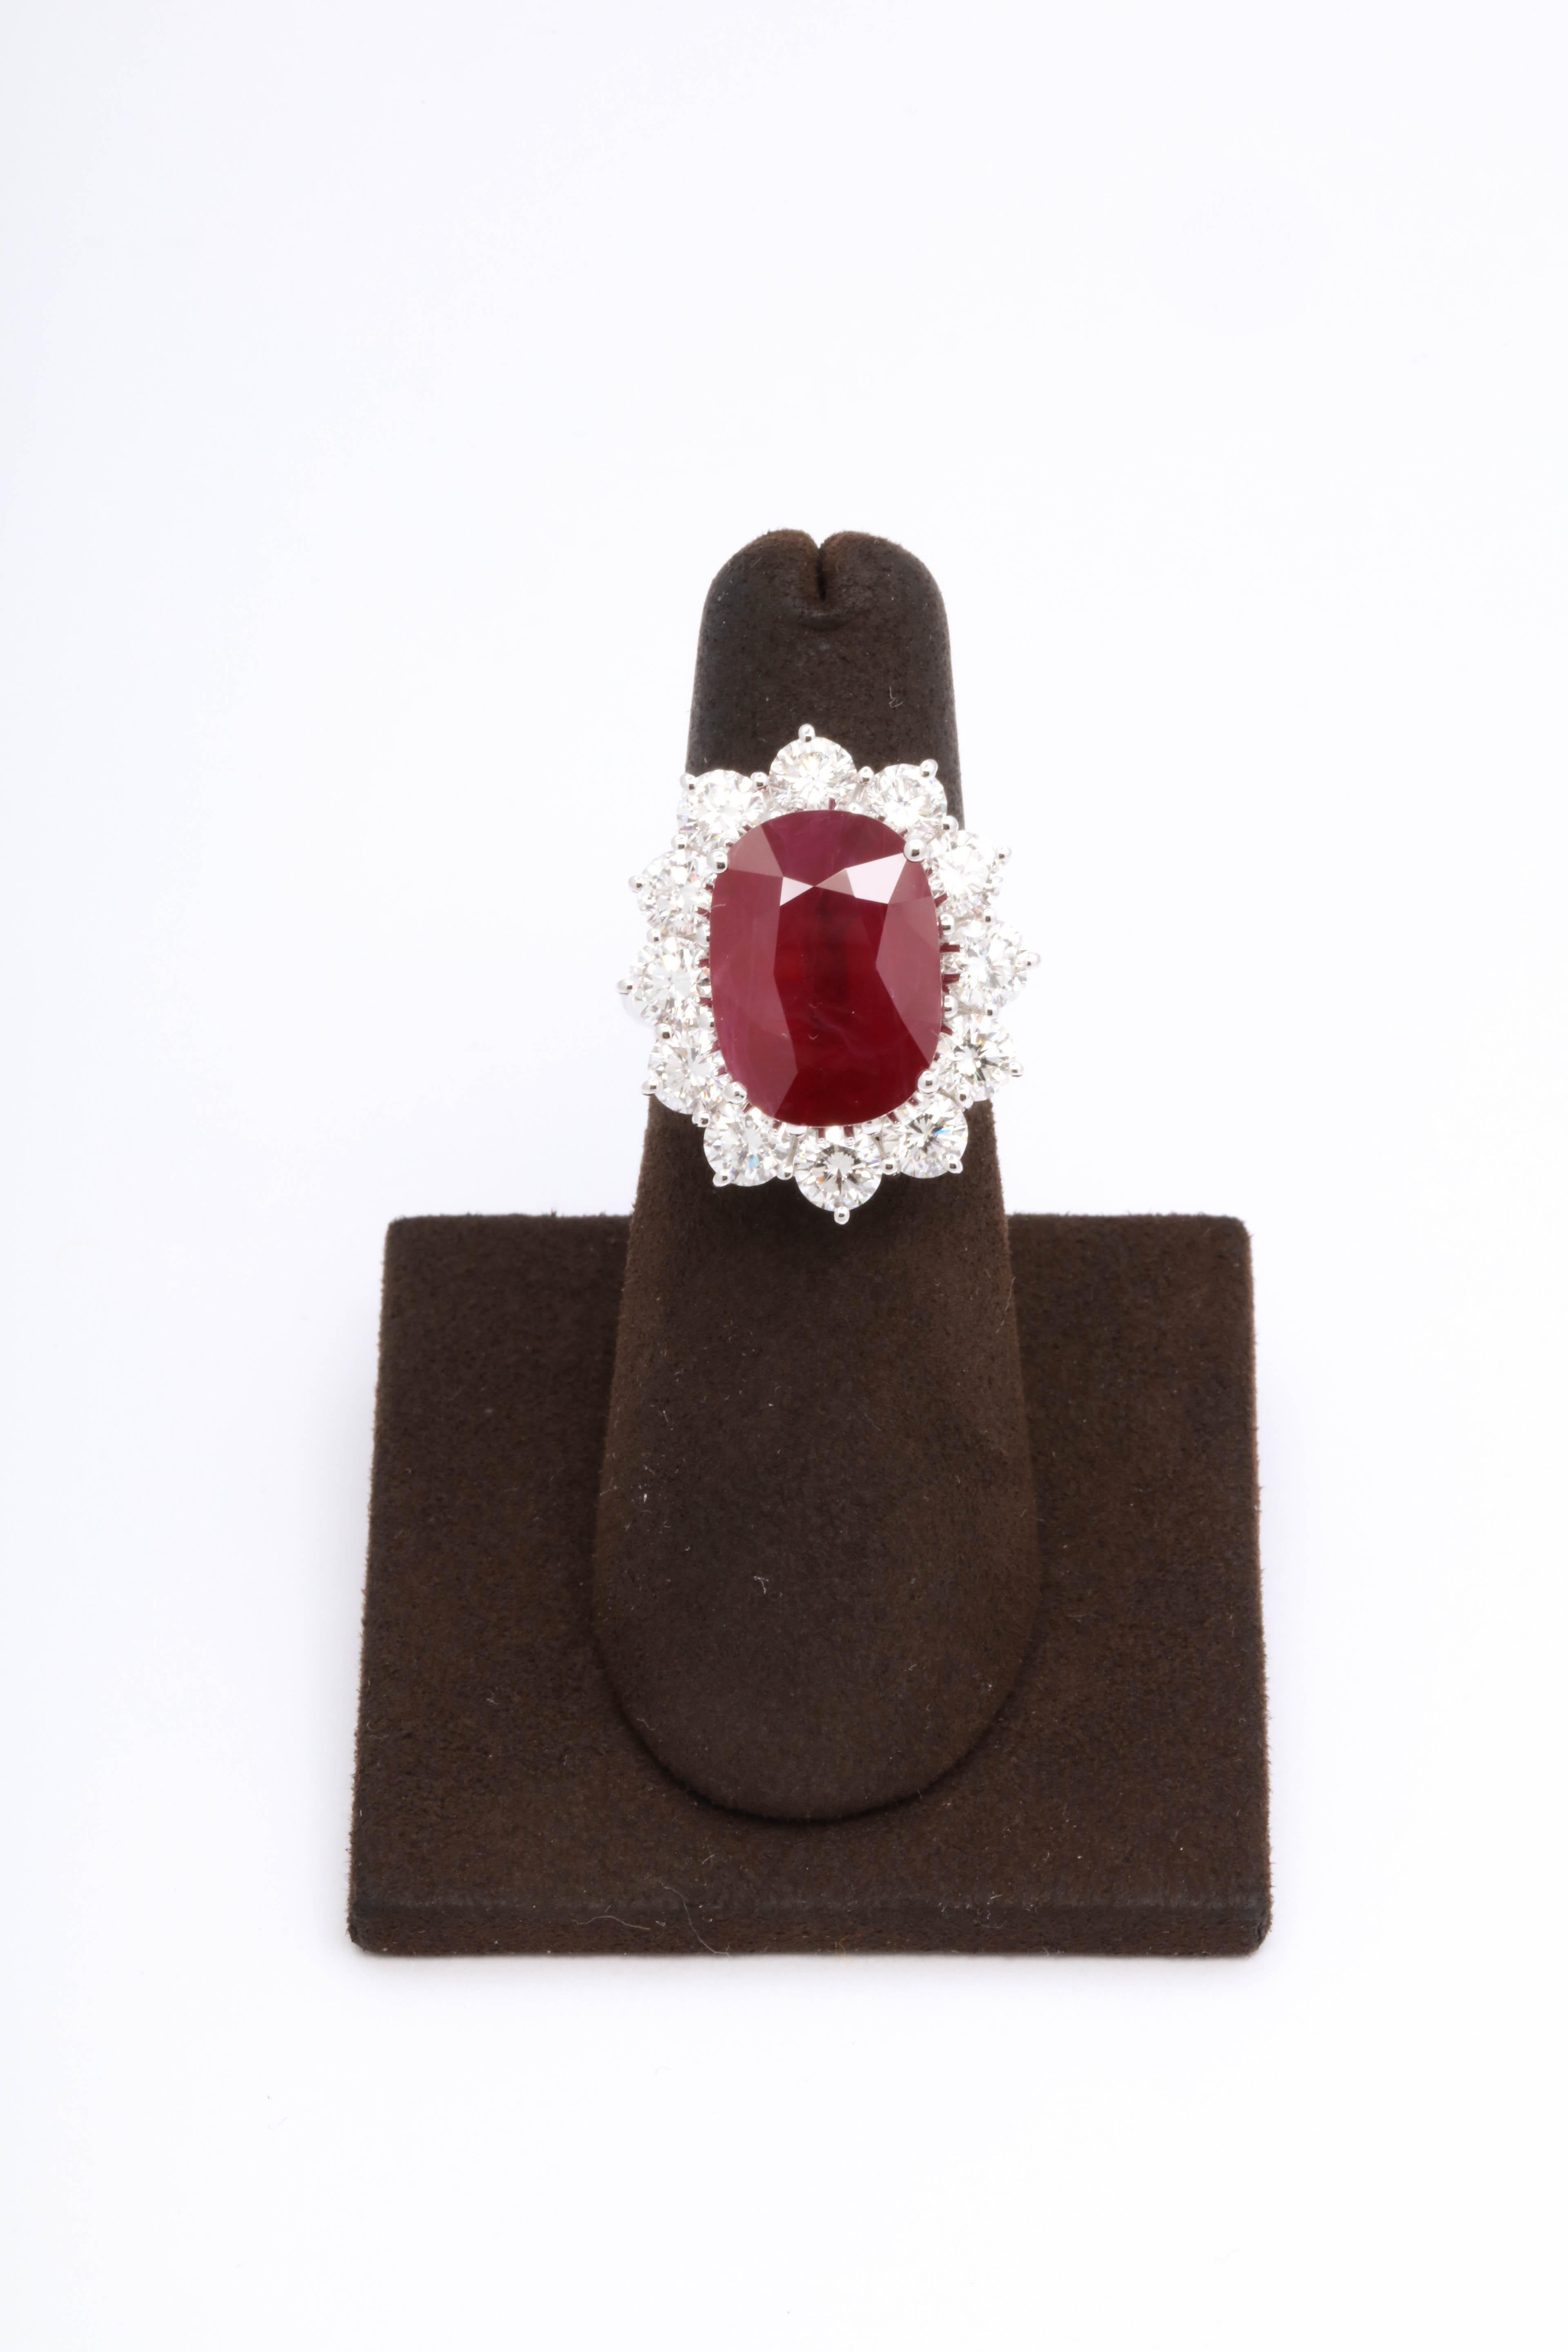 
A true collectors item -- made by famed Italian Jewelry Designer Damiani this ring is SPECTACULAR! 

Gorgeous 9.11 carat Fine Burma Ruby surrounded by 3.60 carats of white round brilliant cut diamonds set in 18k white gold 

The ring can be sized